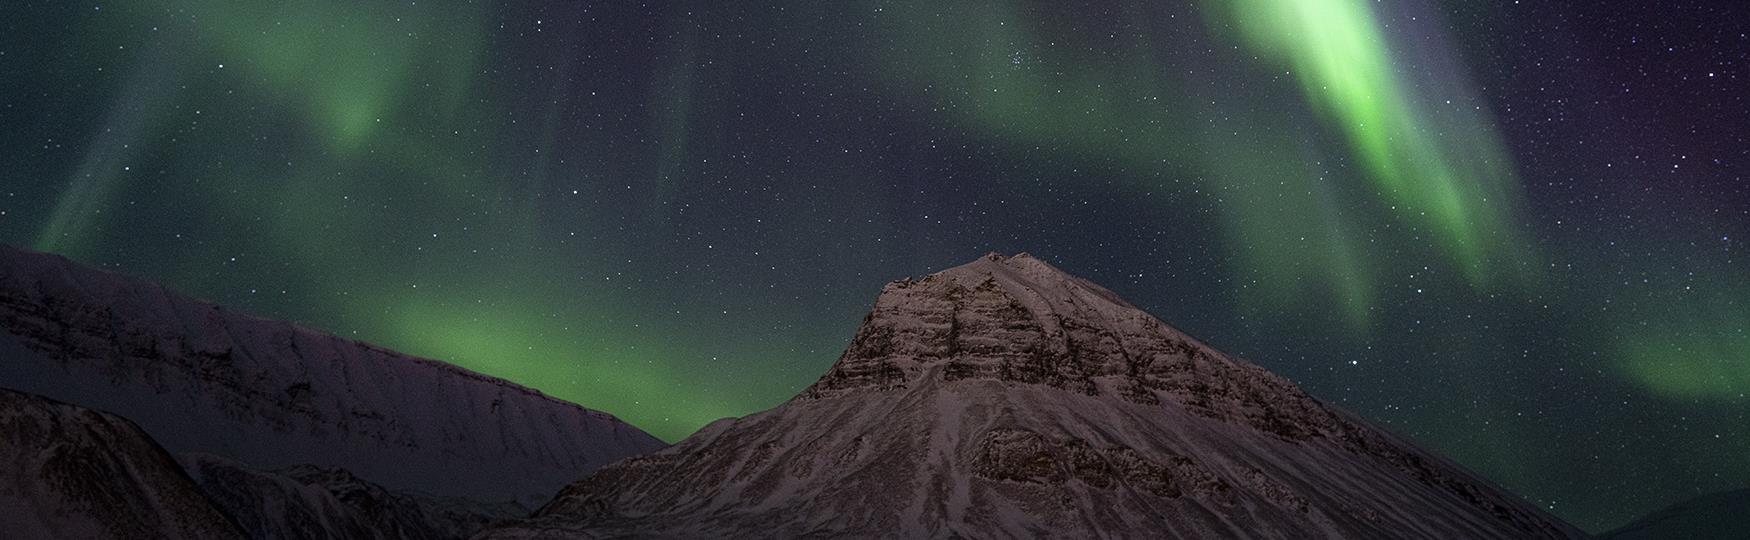 10 things you should know about the Northern Lights